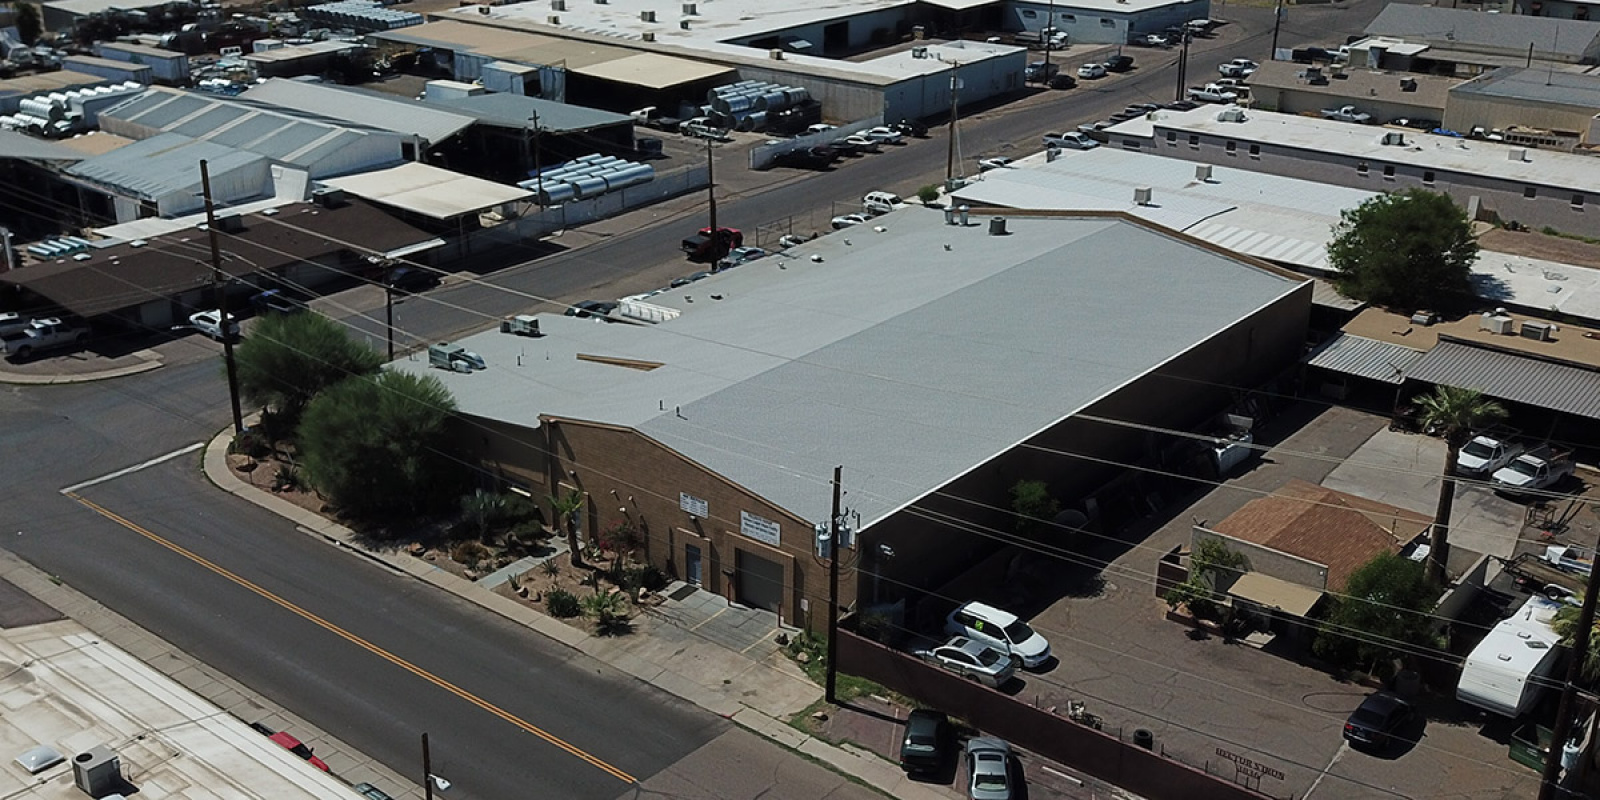 3820 N 39th Ave, Phoenix, Arizona 85019, ,Industrial,Available,N 39th Ave,1210